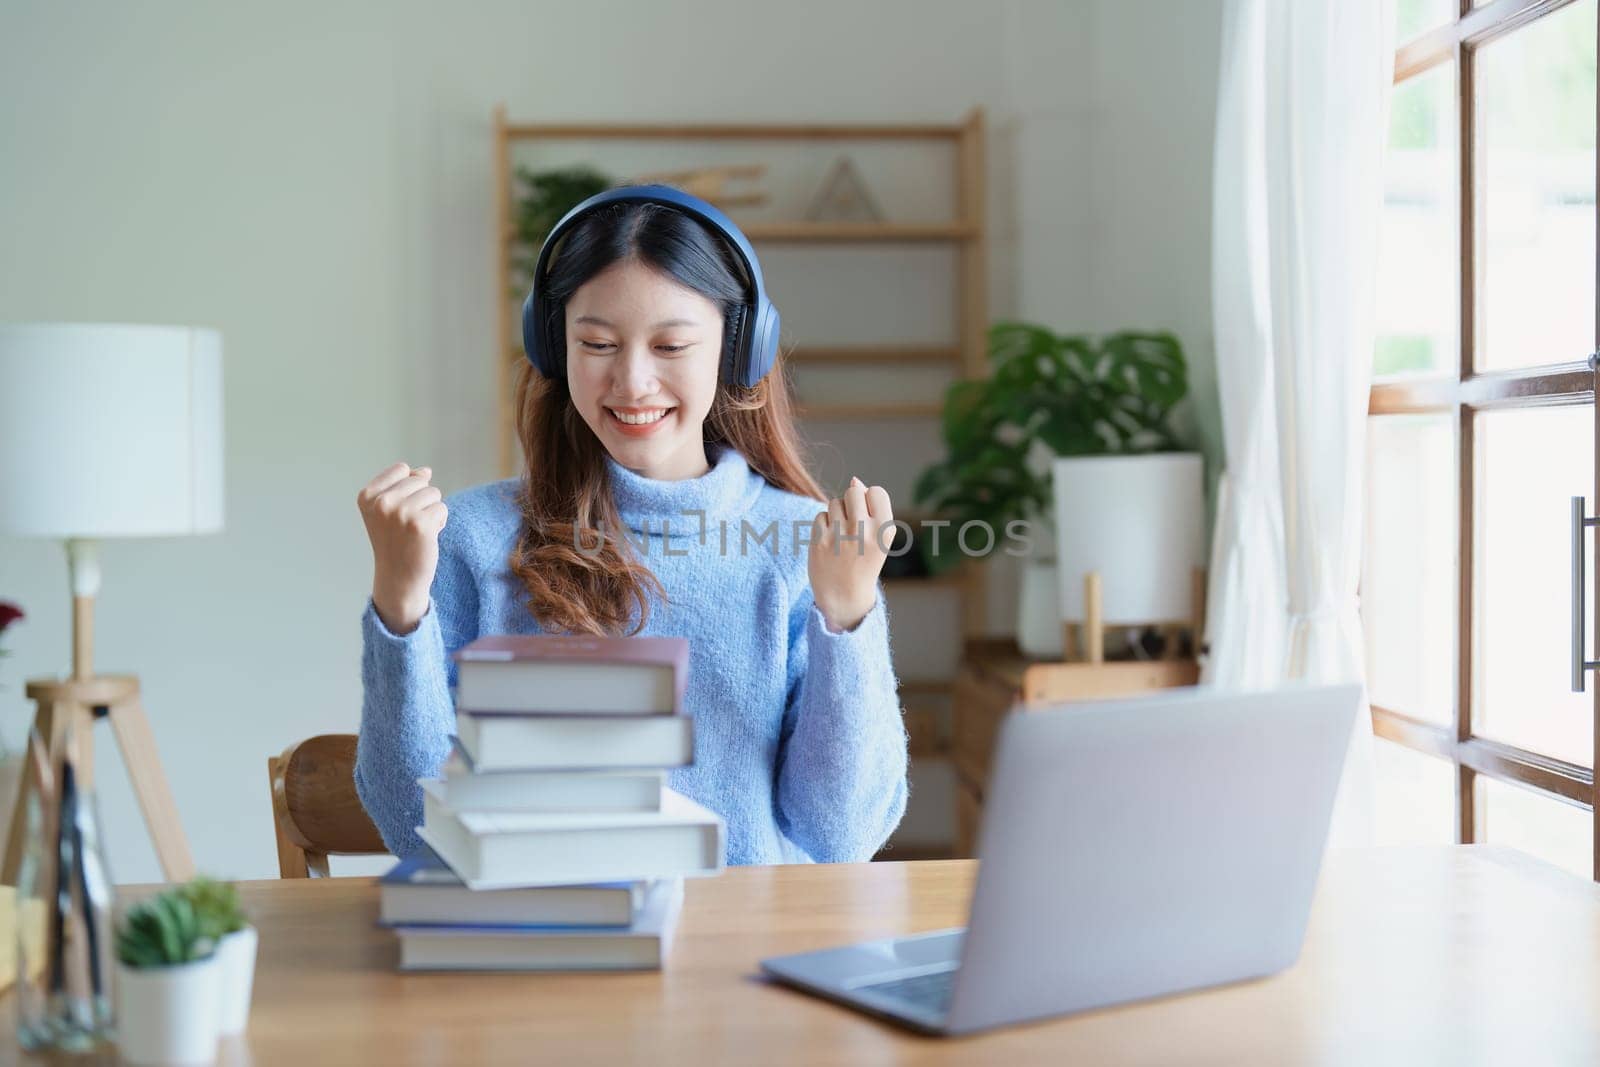 Portrait of young beautiful Asian woman showing smiling face during early morning online class with books, headphones and computer as study materials at home.